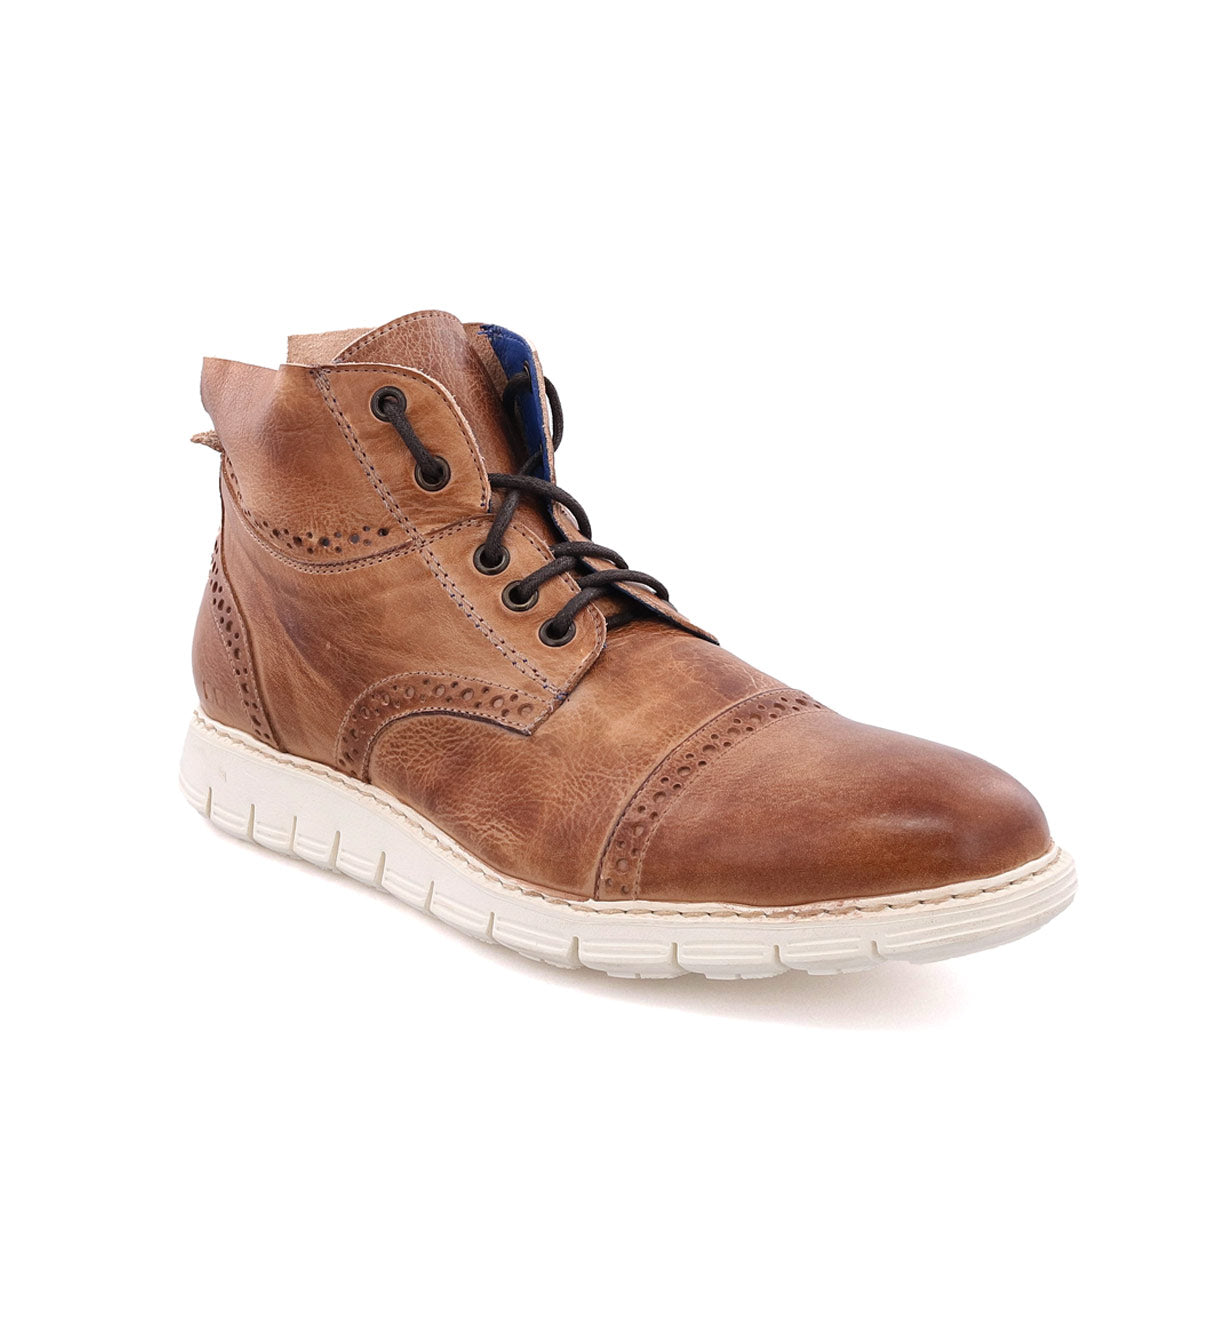 A men's Bowery II boot by Bed Stu, with laces and a white sole.